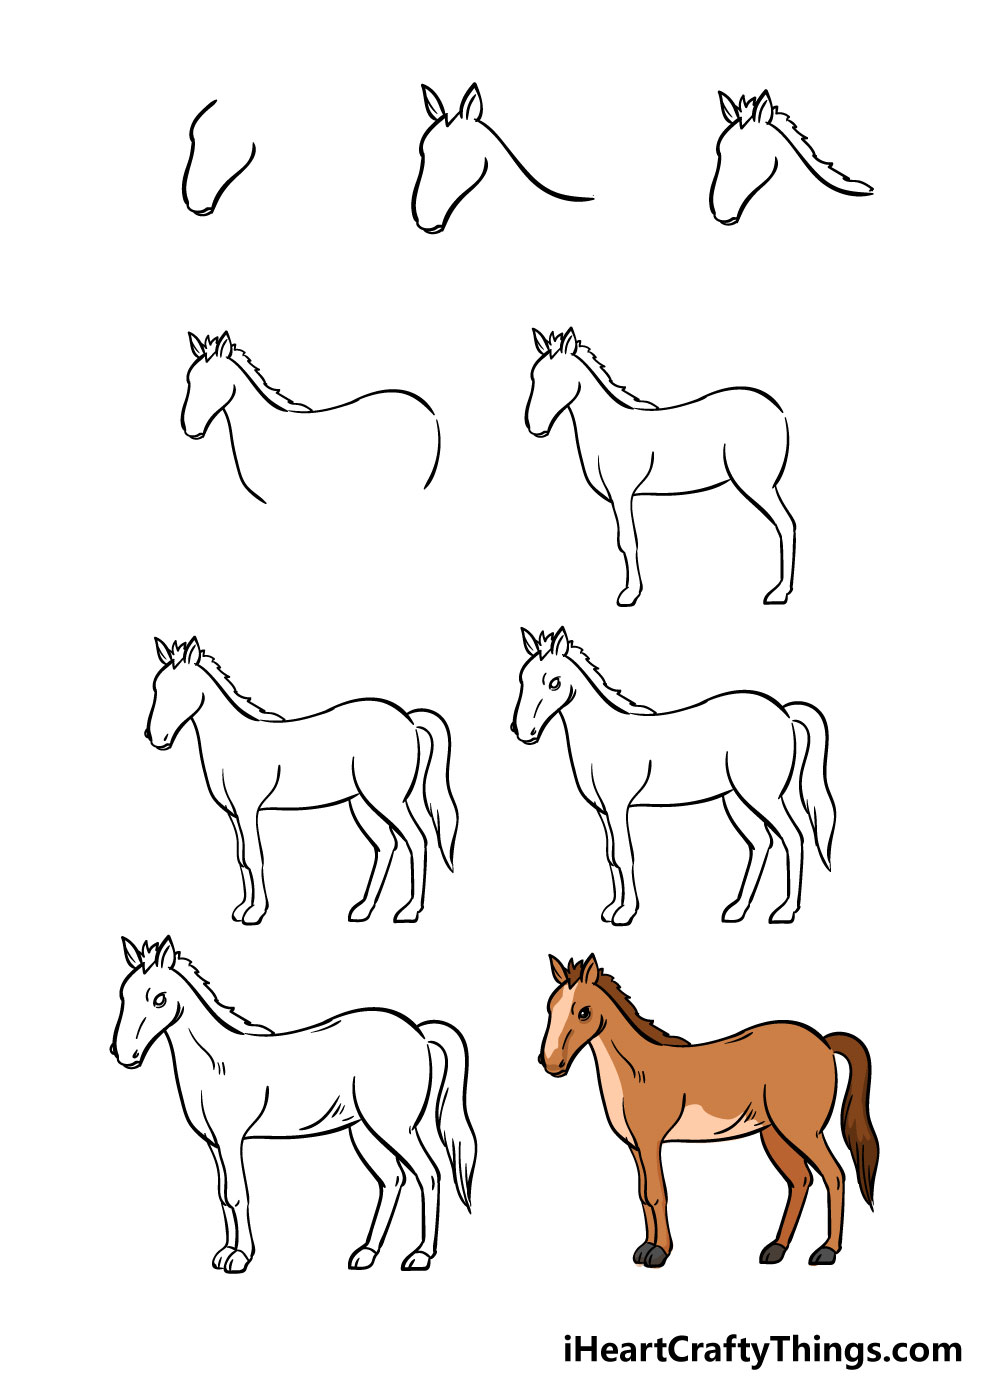 how to draw horse in 9 steps